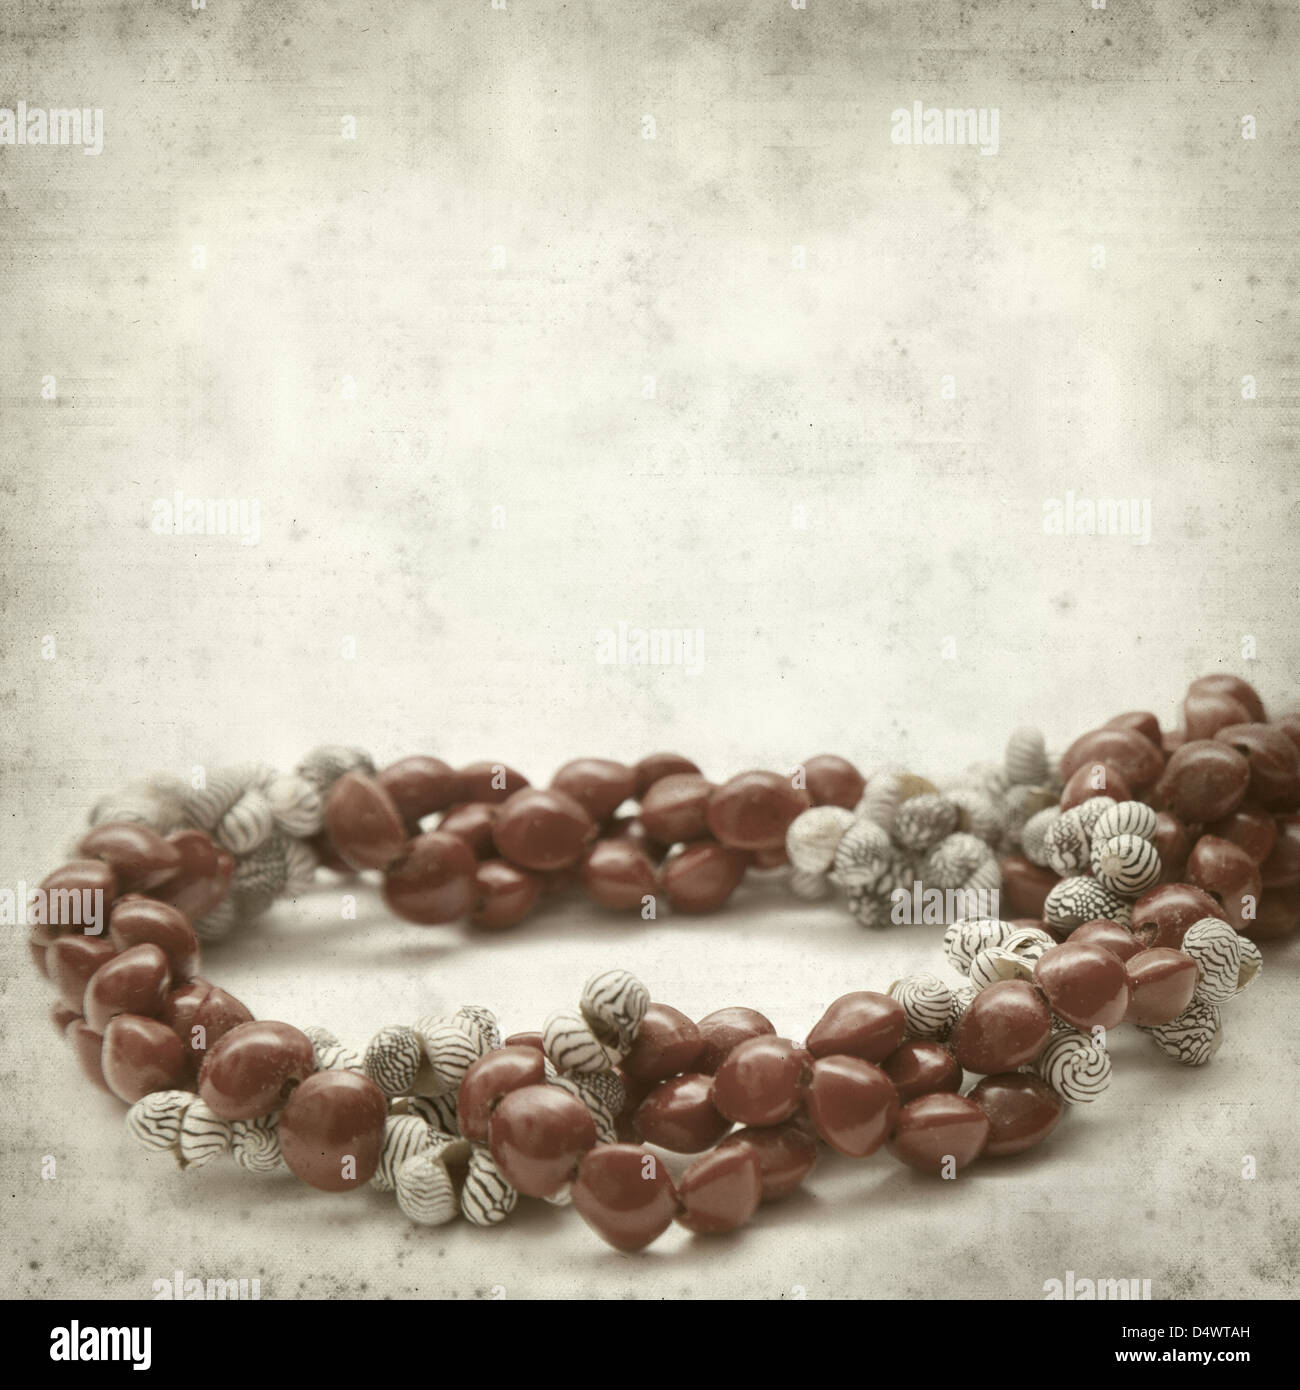 textured old paper background with necklace of seeds and shells Stock Photo